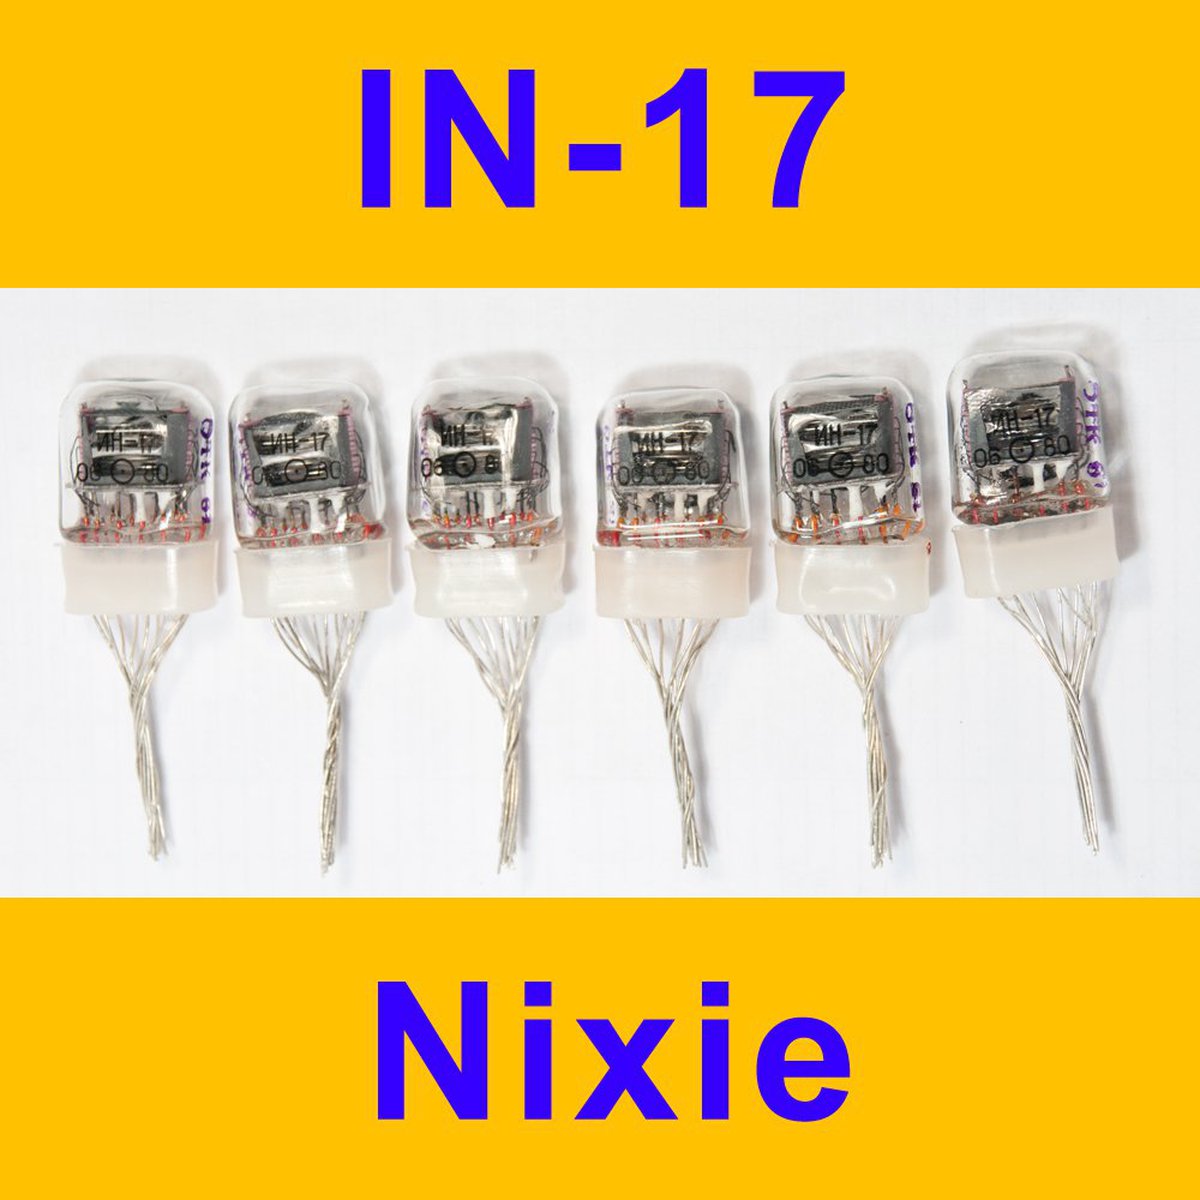 nixie tubes for clock Lot of 6 pcs IN-17 tested new ИН-17 